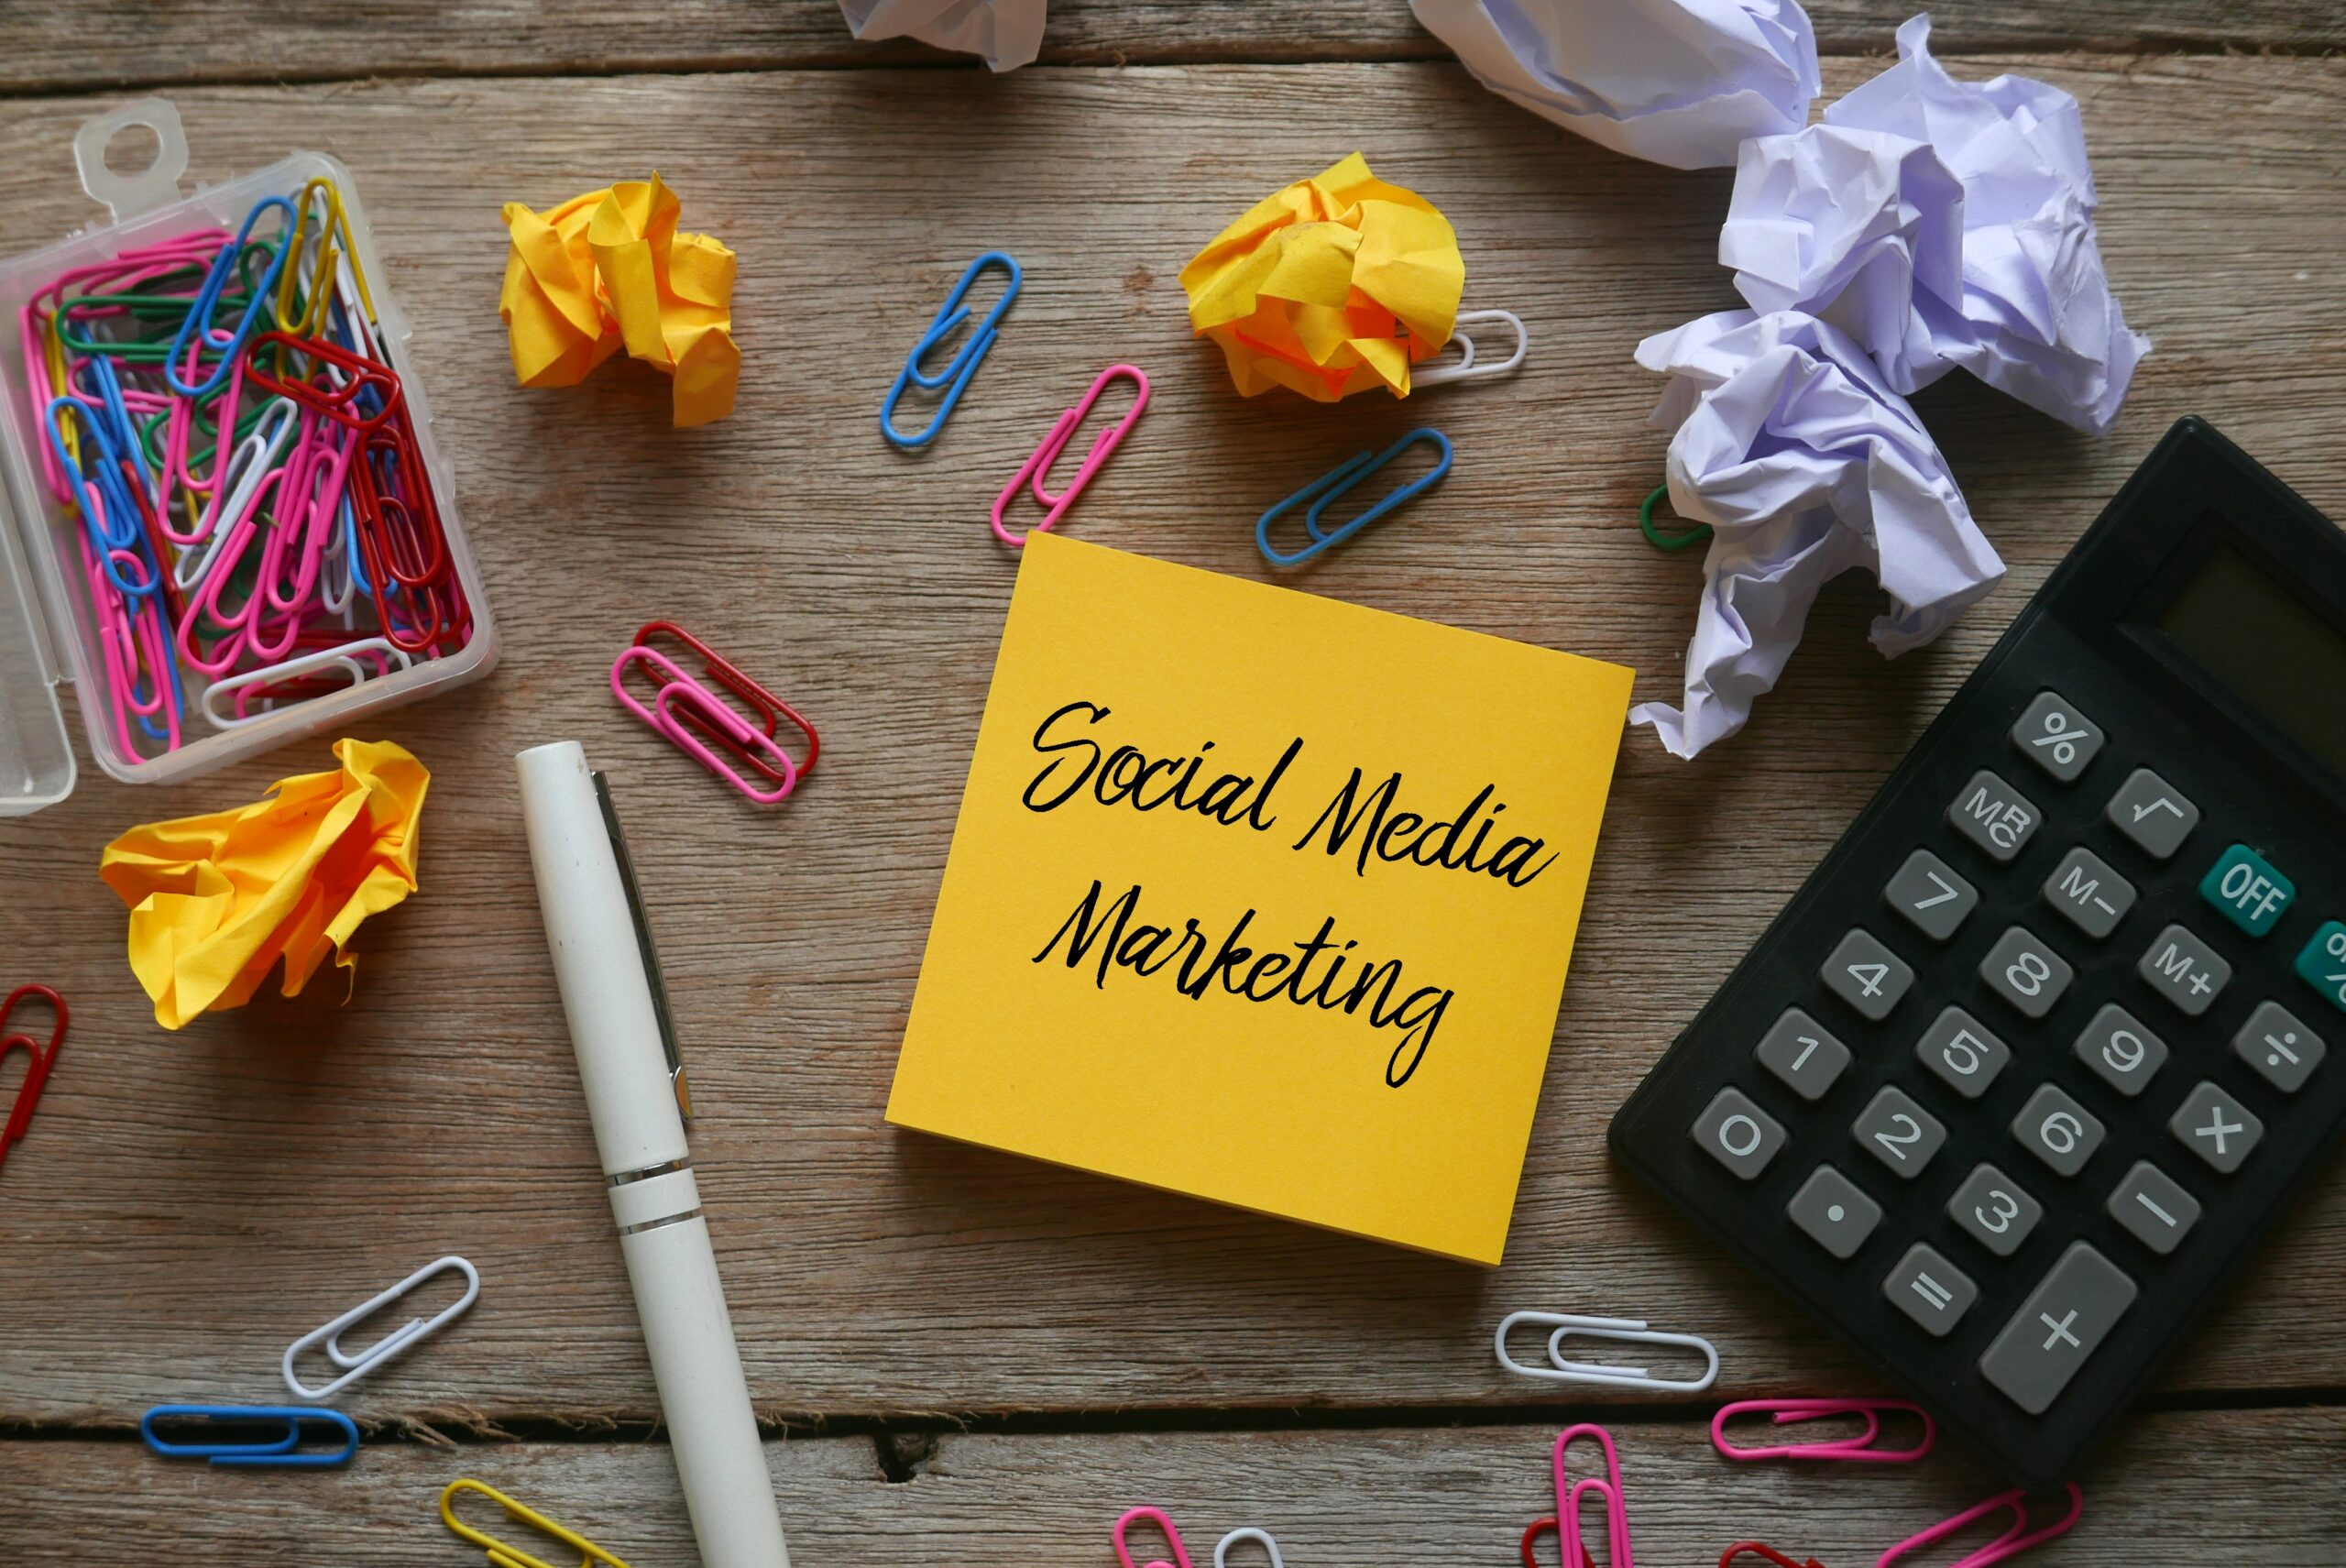 How effective is social media marketing?